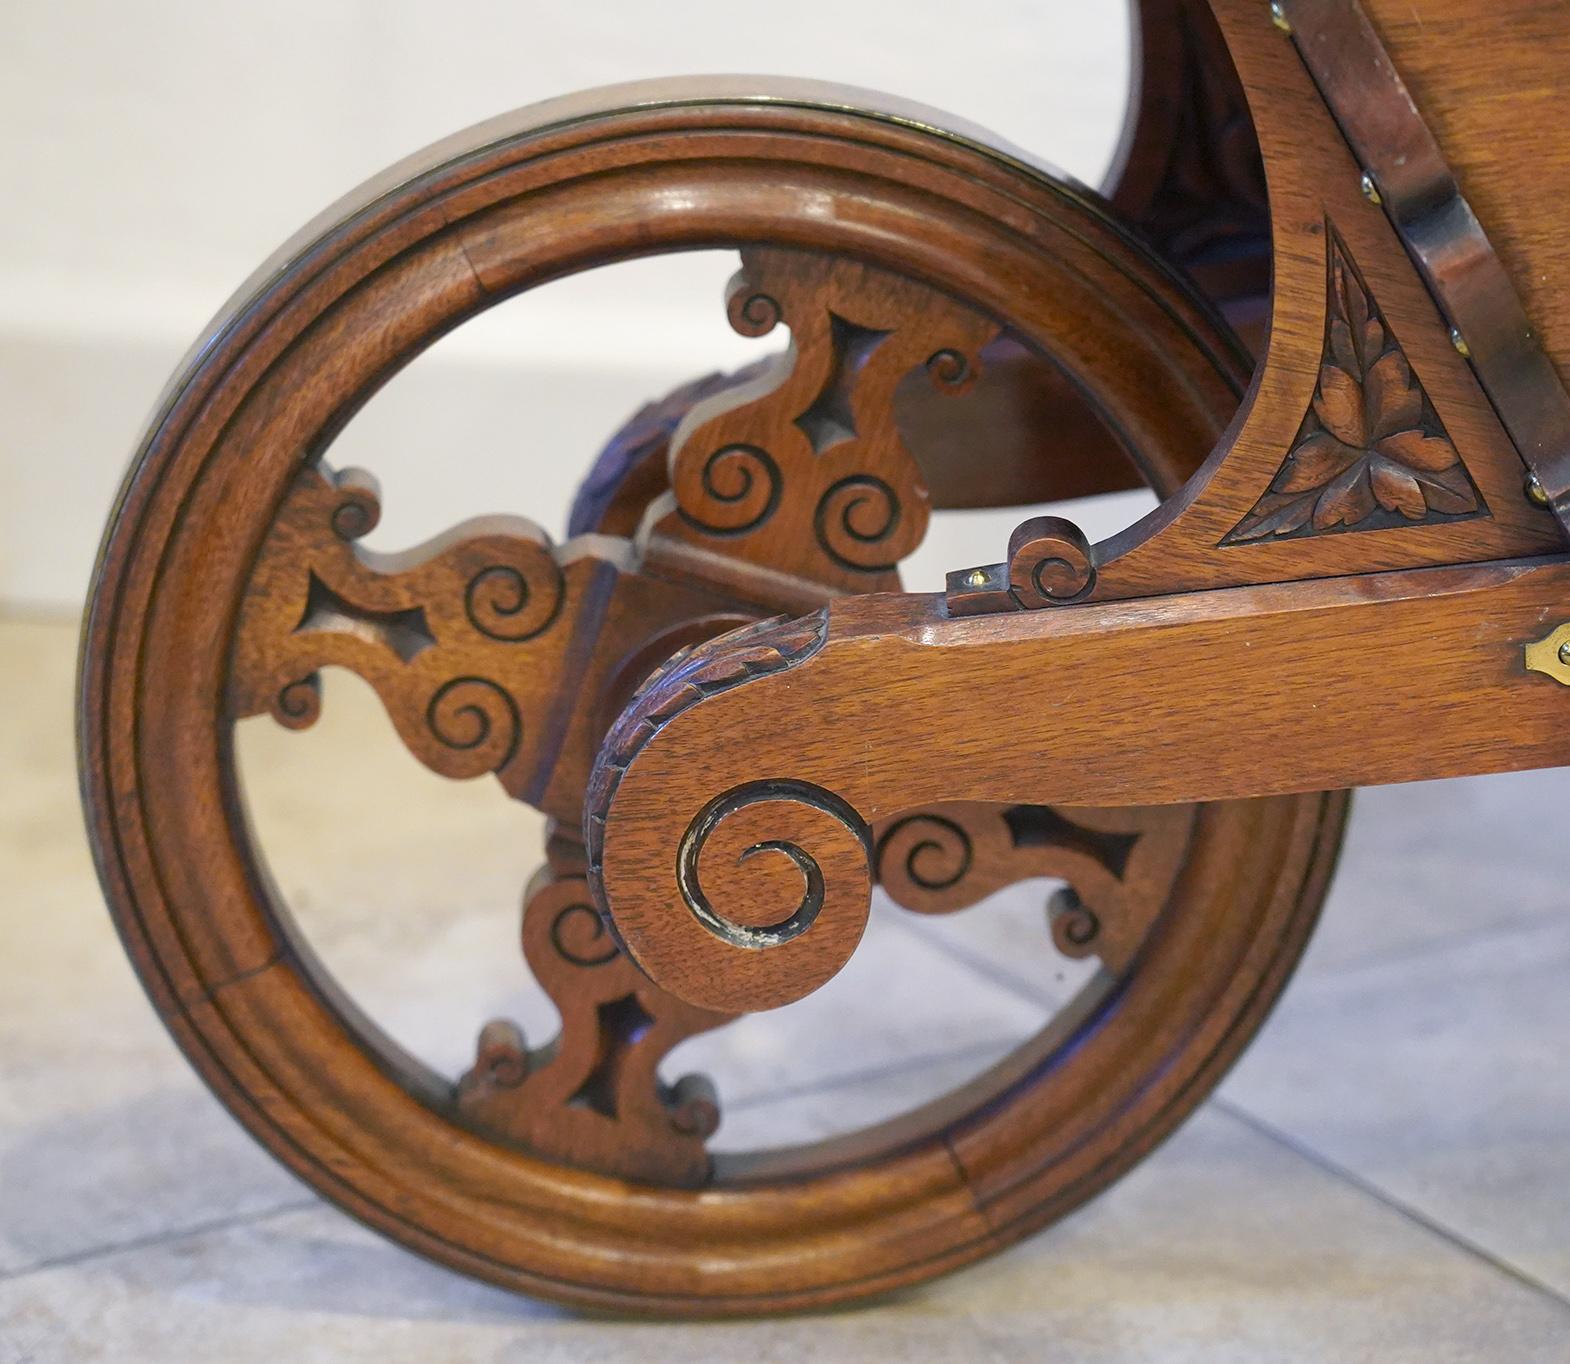 This early 20th century English Edwardian carved mahogany wheel barrow was used for the transport and display of books in a library setting. It is artfully crafted with brass-clad wheel and decorative brass hardware, carvings and turned axel. It